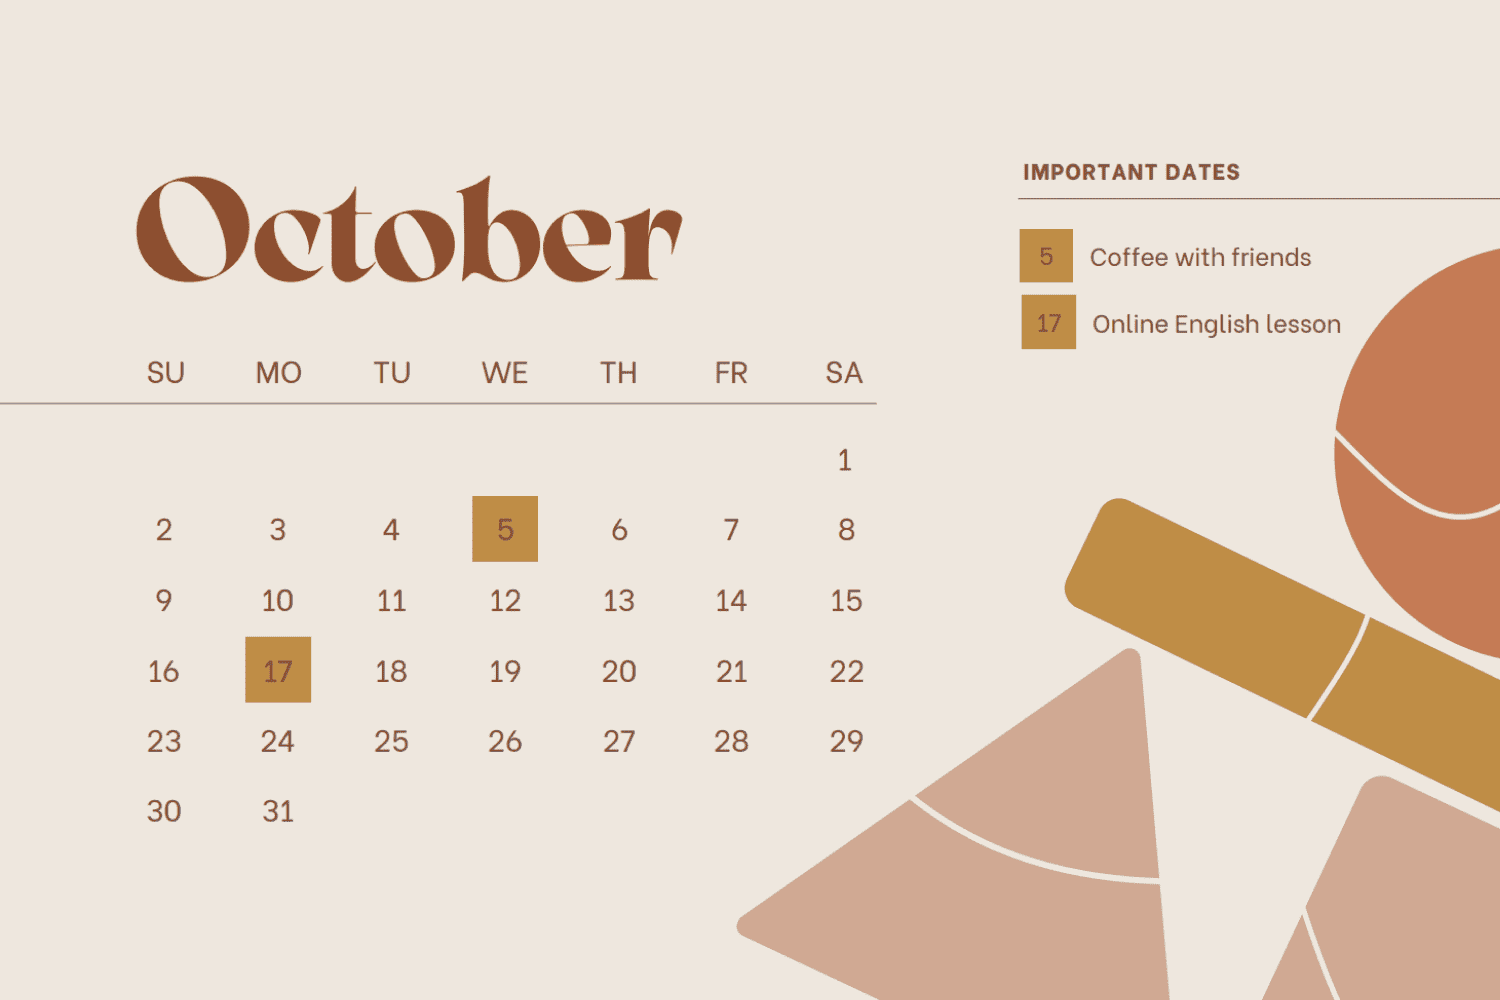 October calendar with highlighted important days.